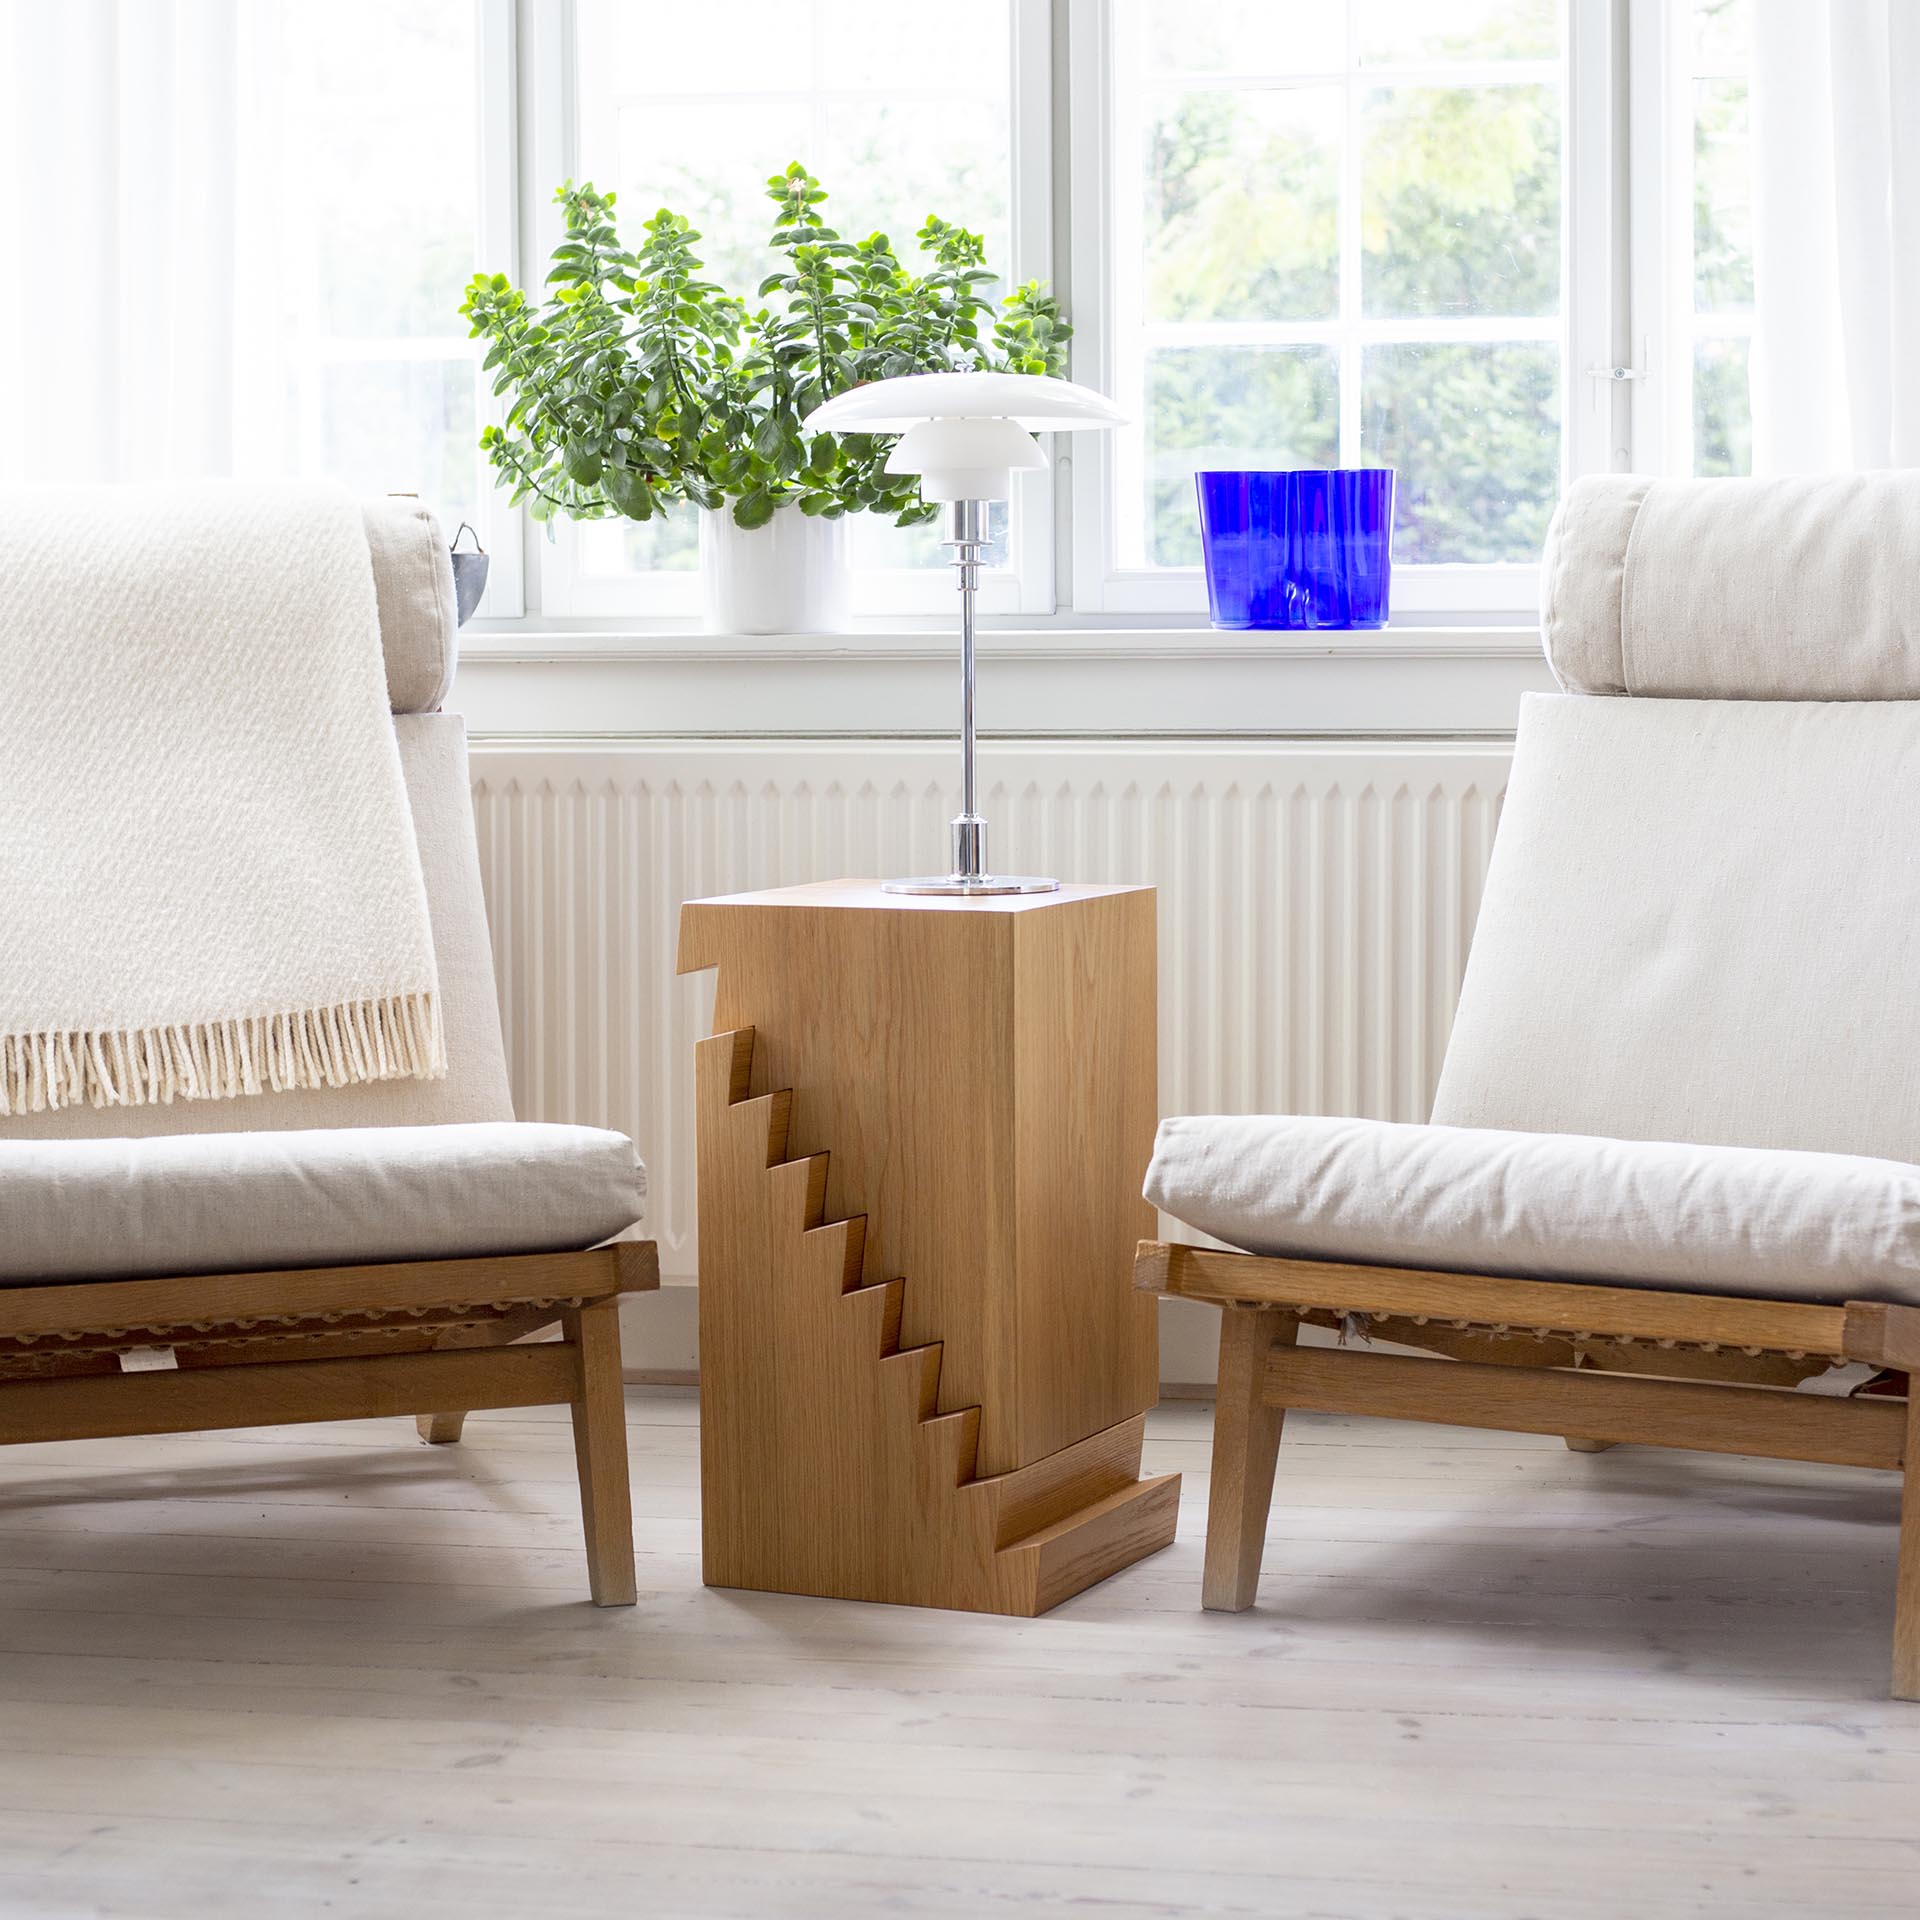 A modern wood side table with a saw-tooth design.